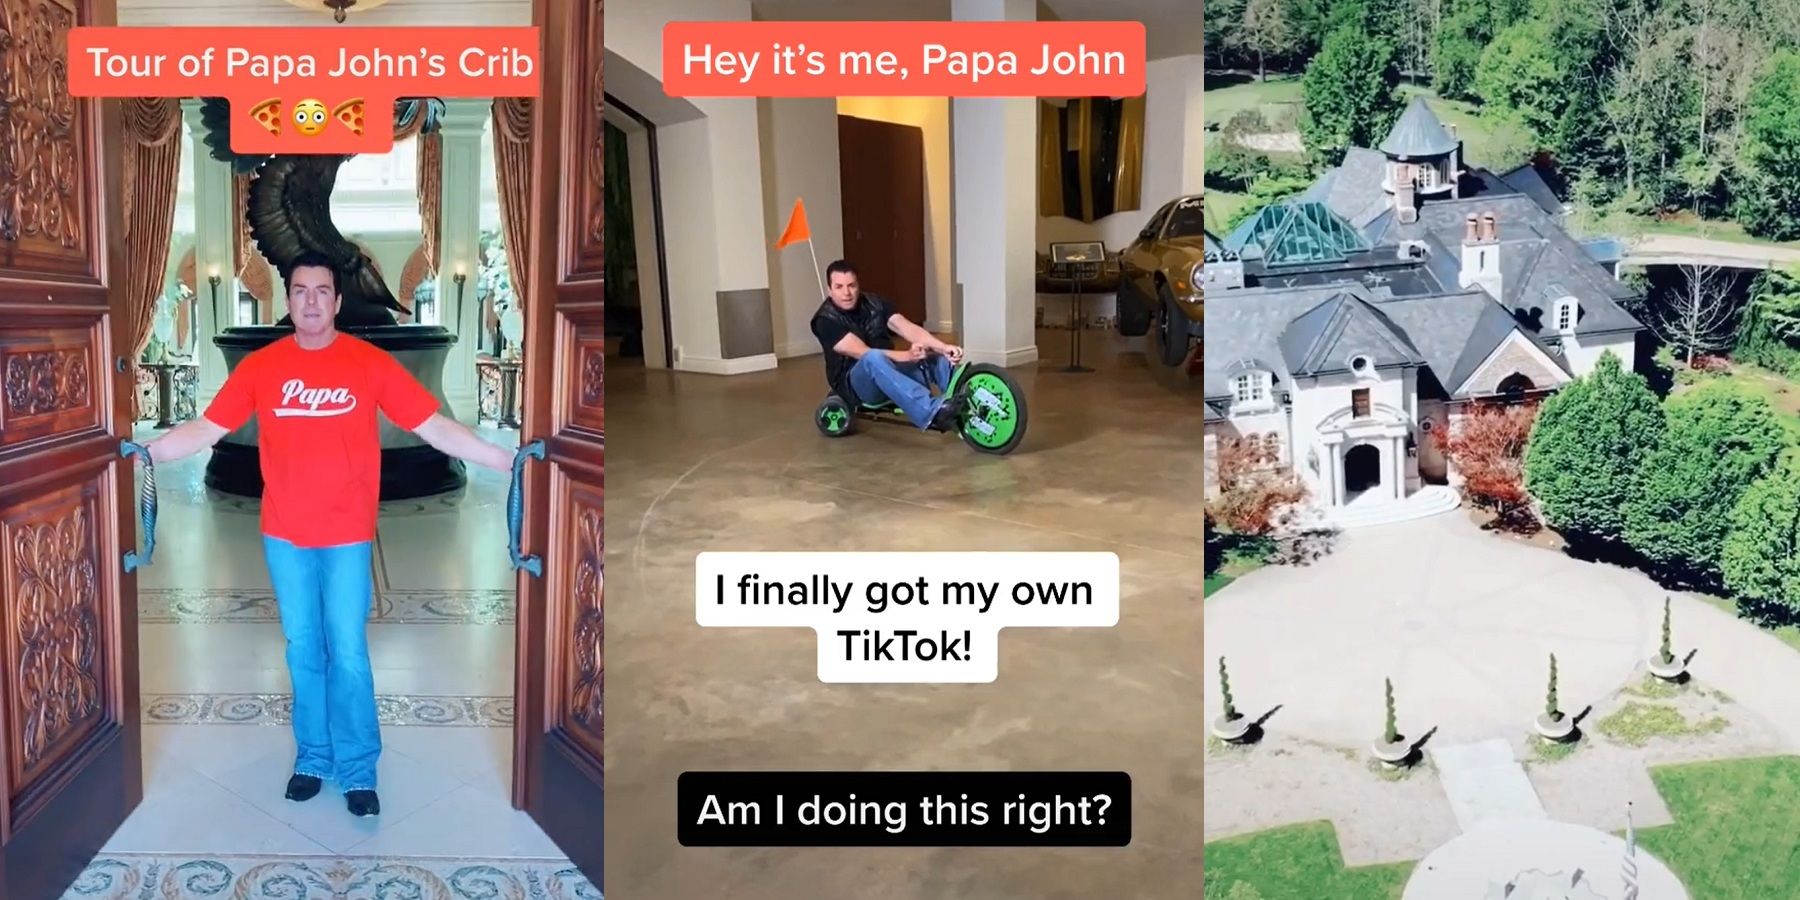 Papa Johns Founder Uses TikTok To Show Off Mansion In MTV CribsStyle Video